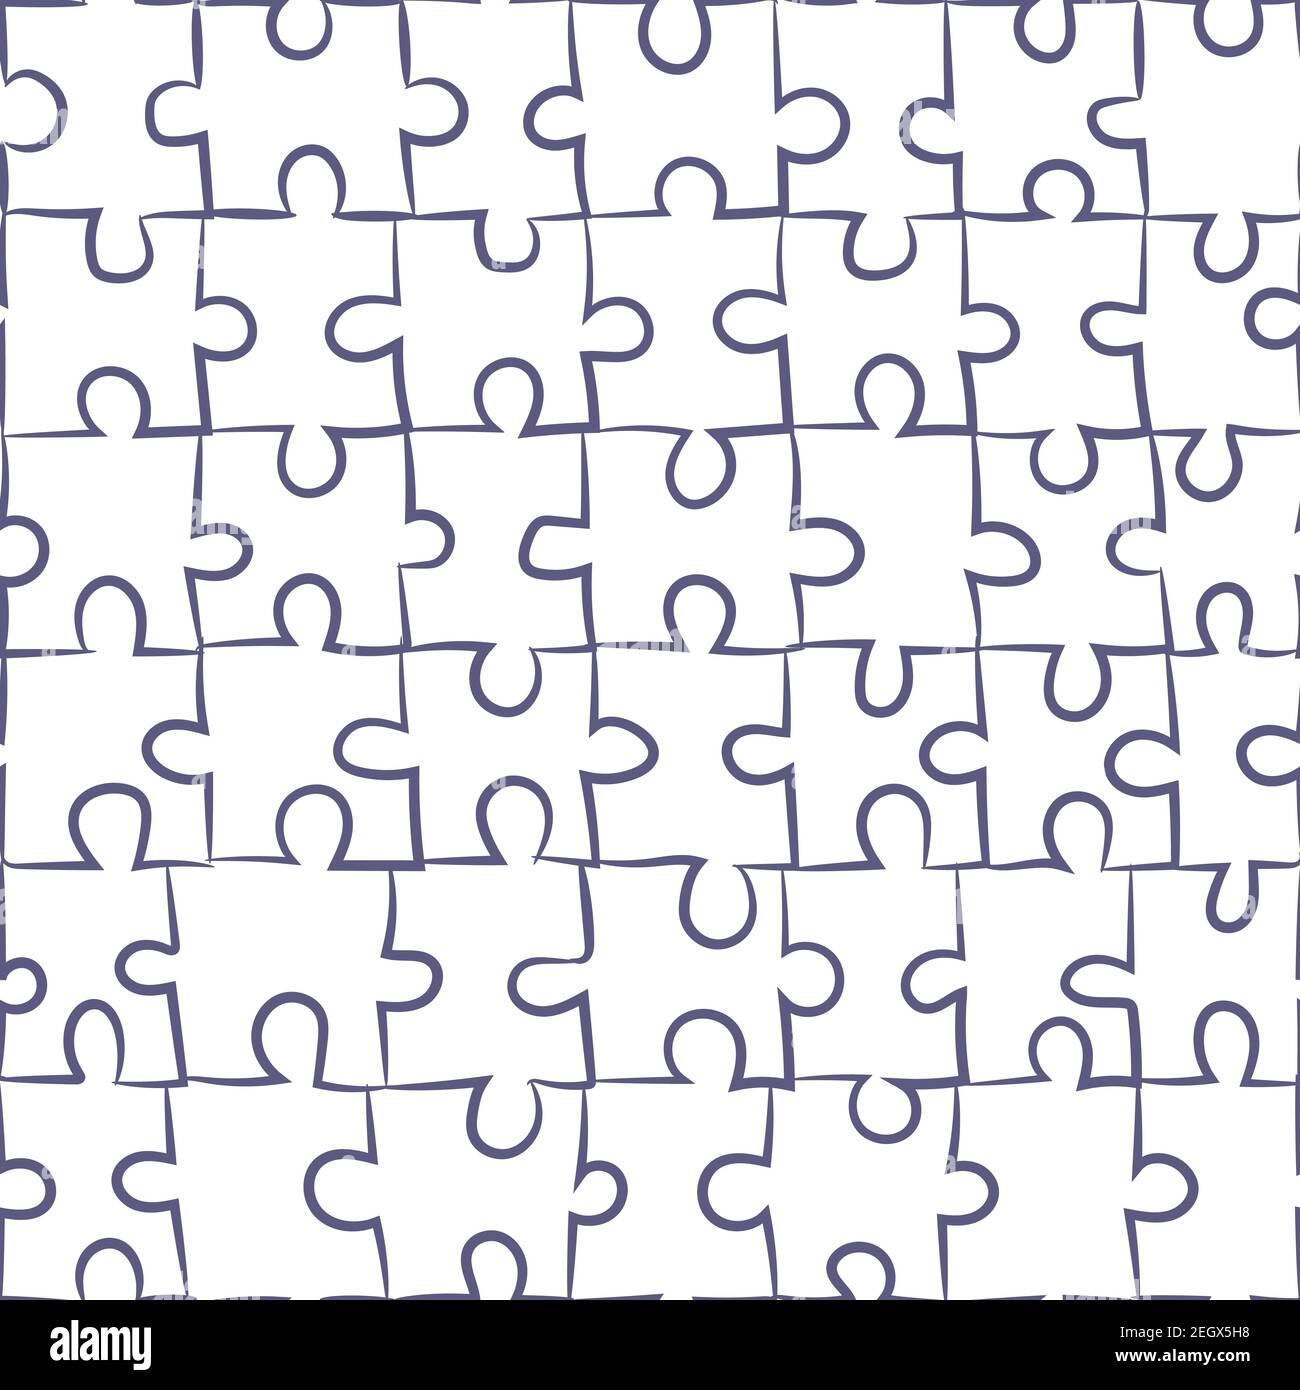 Seamless pattern with puzzle pieces Stock Vector